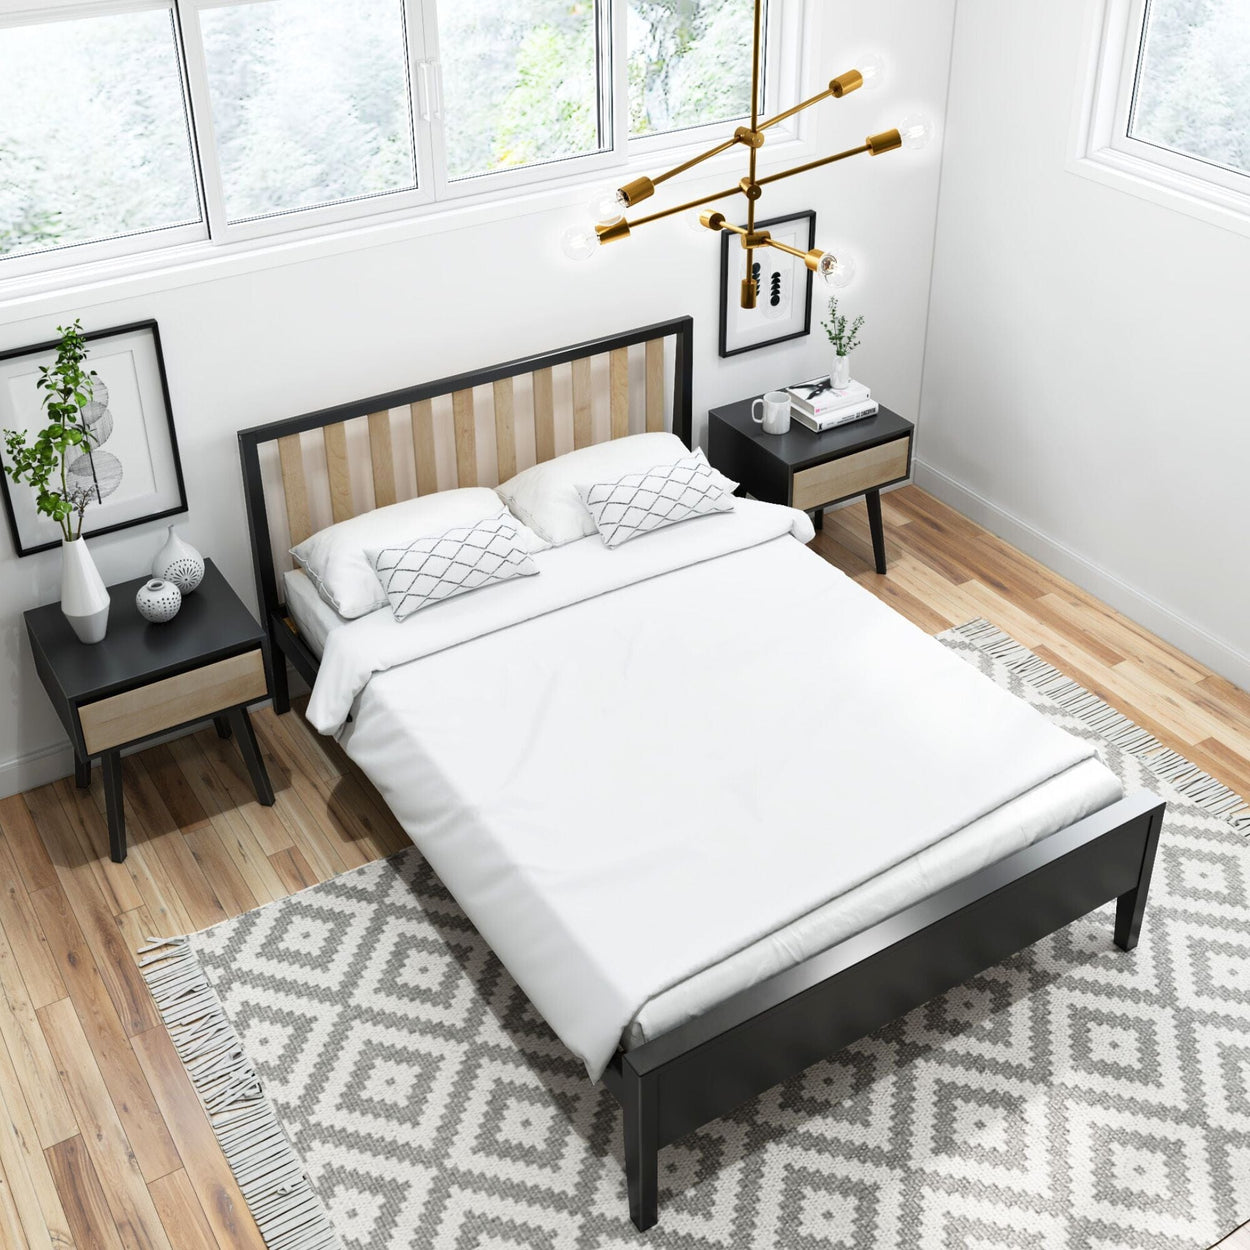 Modern Solid Wood Full Size Bed with Slatted Headboard Single Beds Plank+Beam 